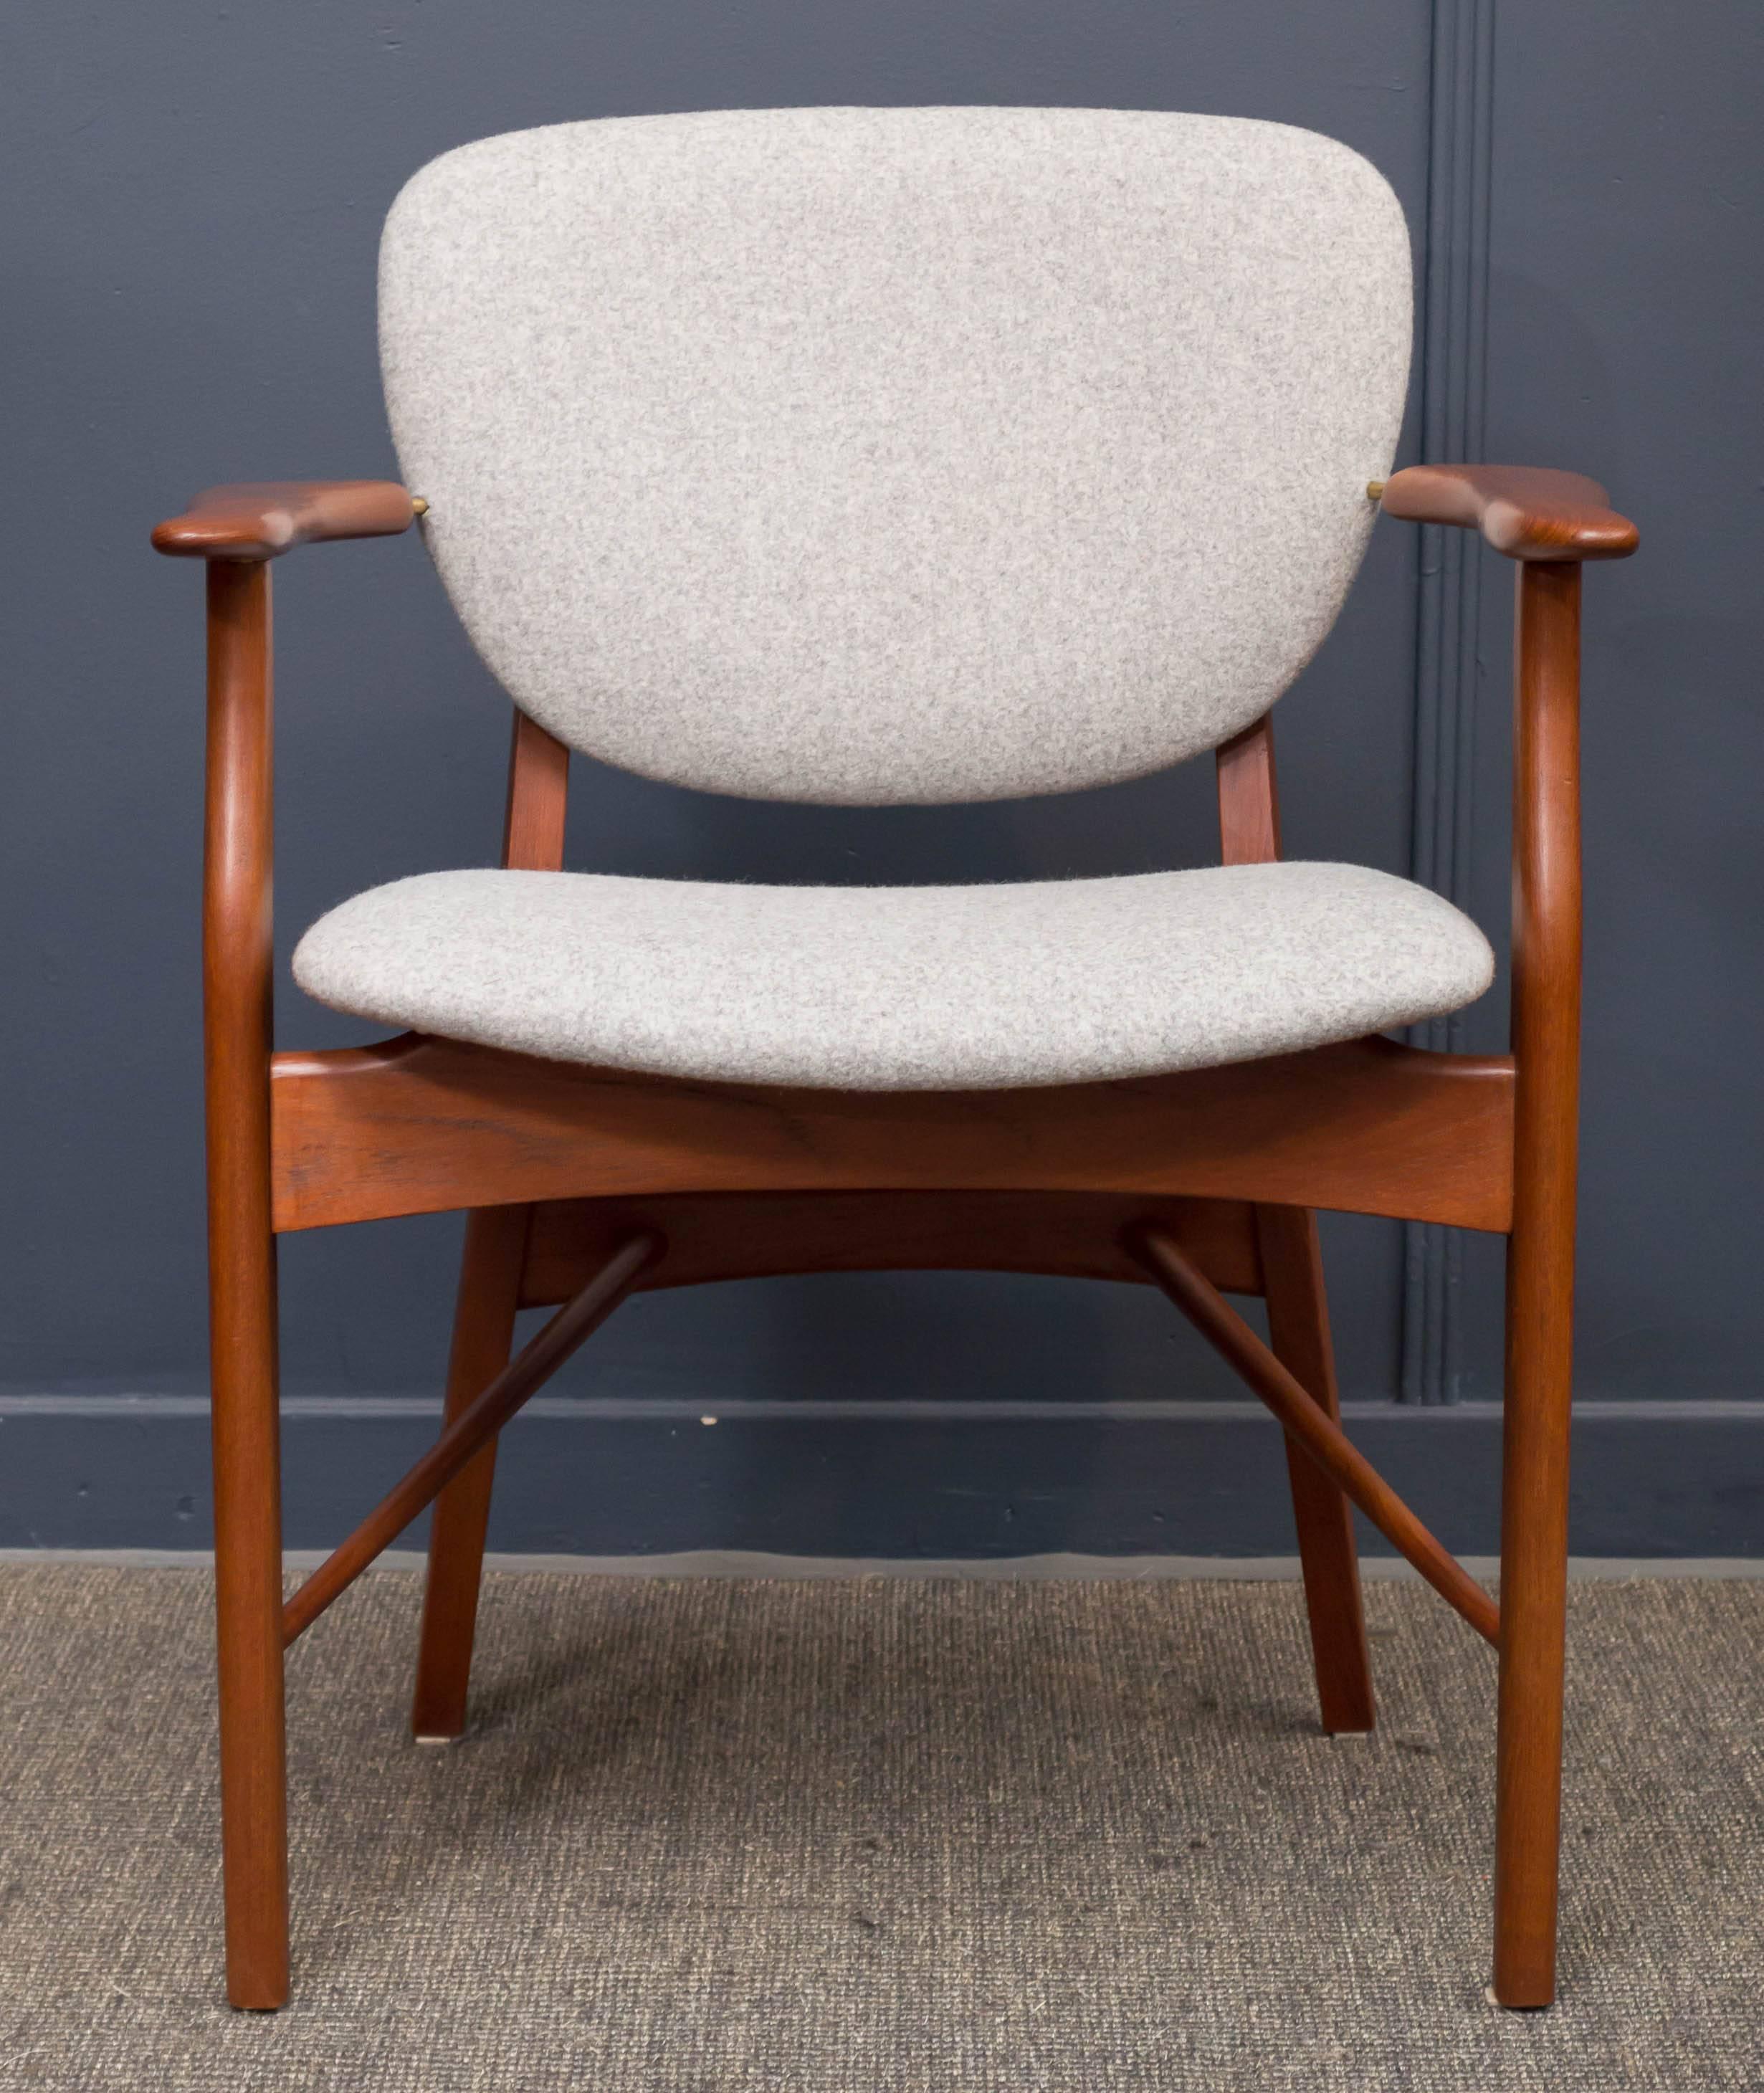 Danish Modern design teak armchair by P. Vodder for Niels Moller cabinet  maker.
 Perfectly refinished and newly upholstered.